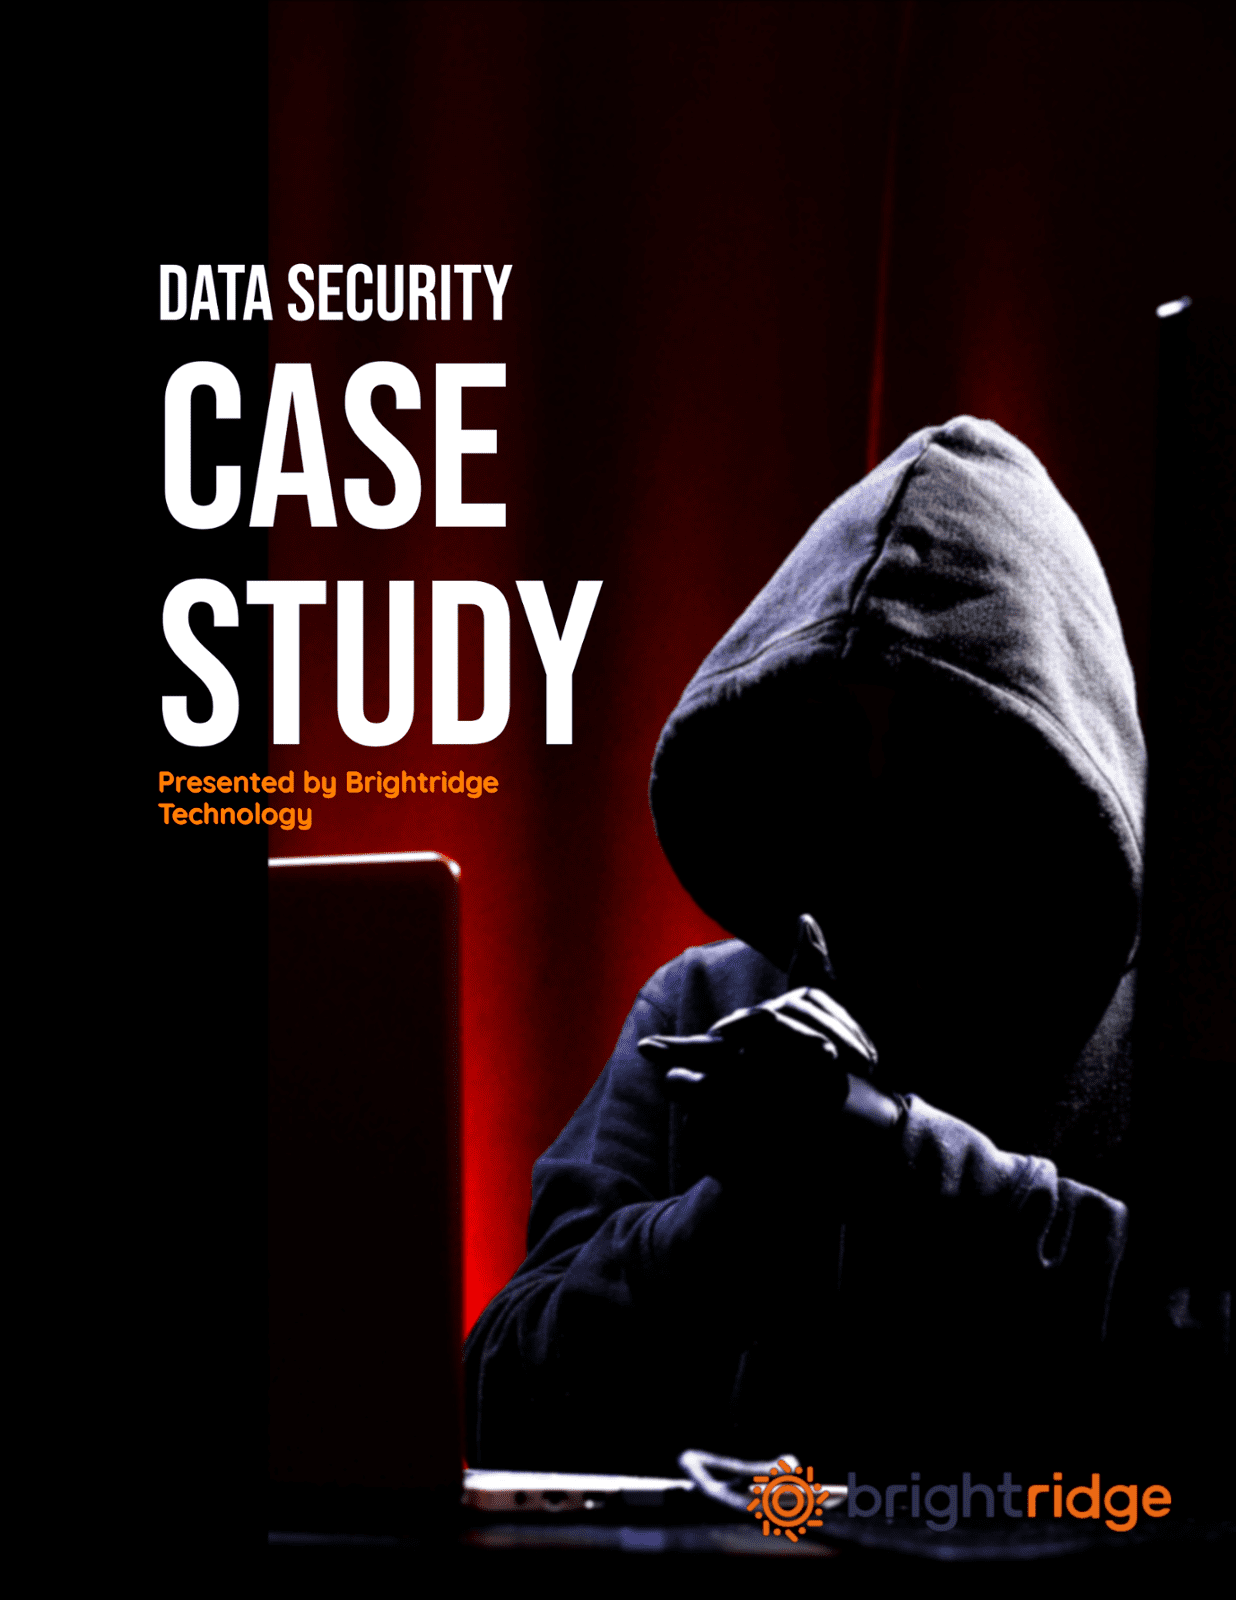 Data Security Case Study